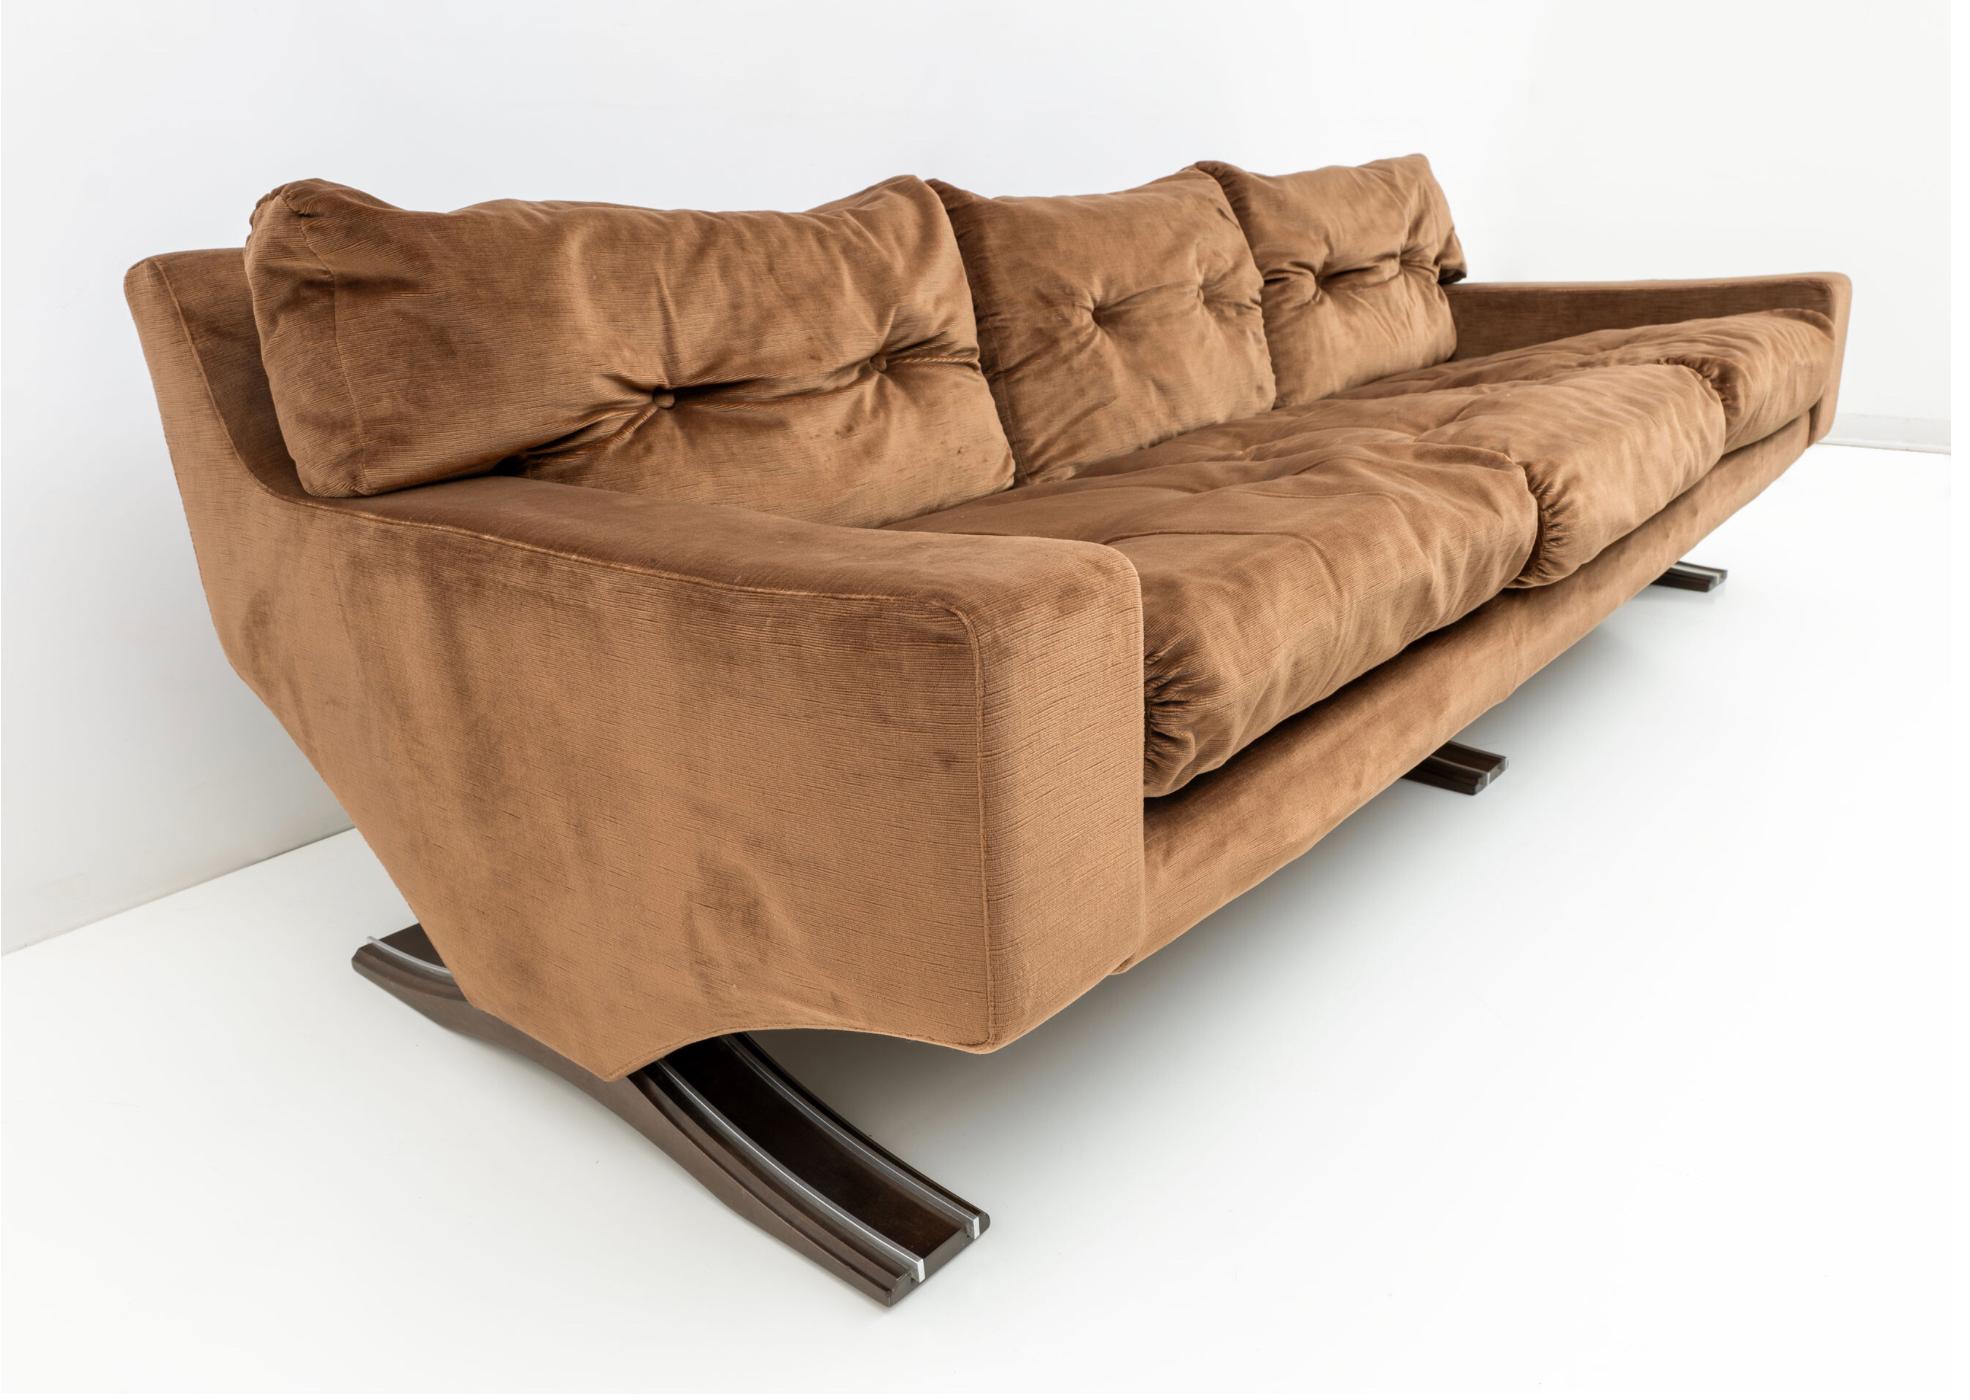 Franz Sartori is best known for his organic sculptural work but he also designed furniture which reflected his sculptural talent. 
 These incredible e seats sofa is extremely comfortable and also reflect the organic forms Franz Sartori is known for.